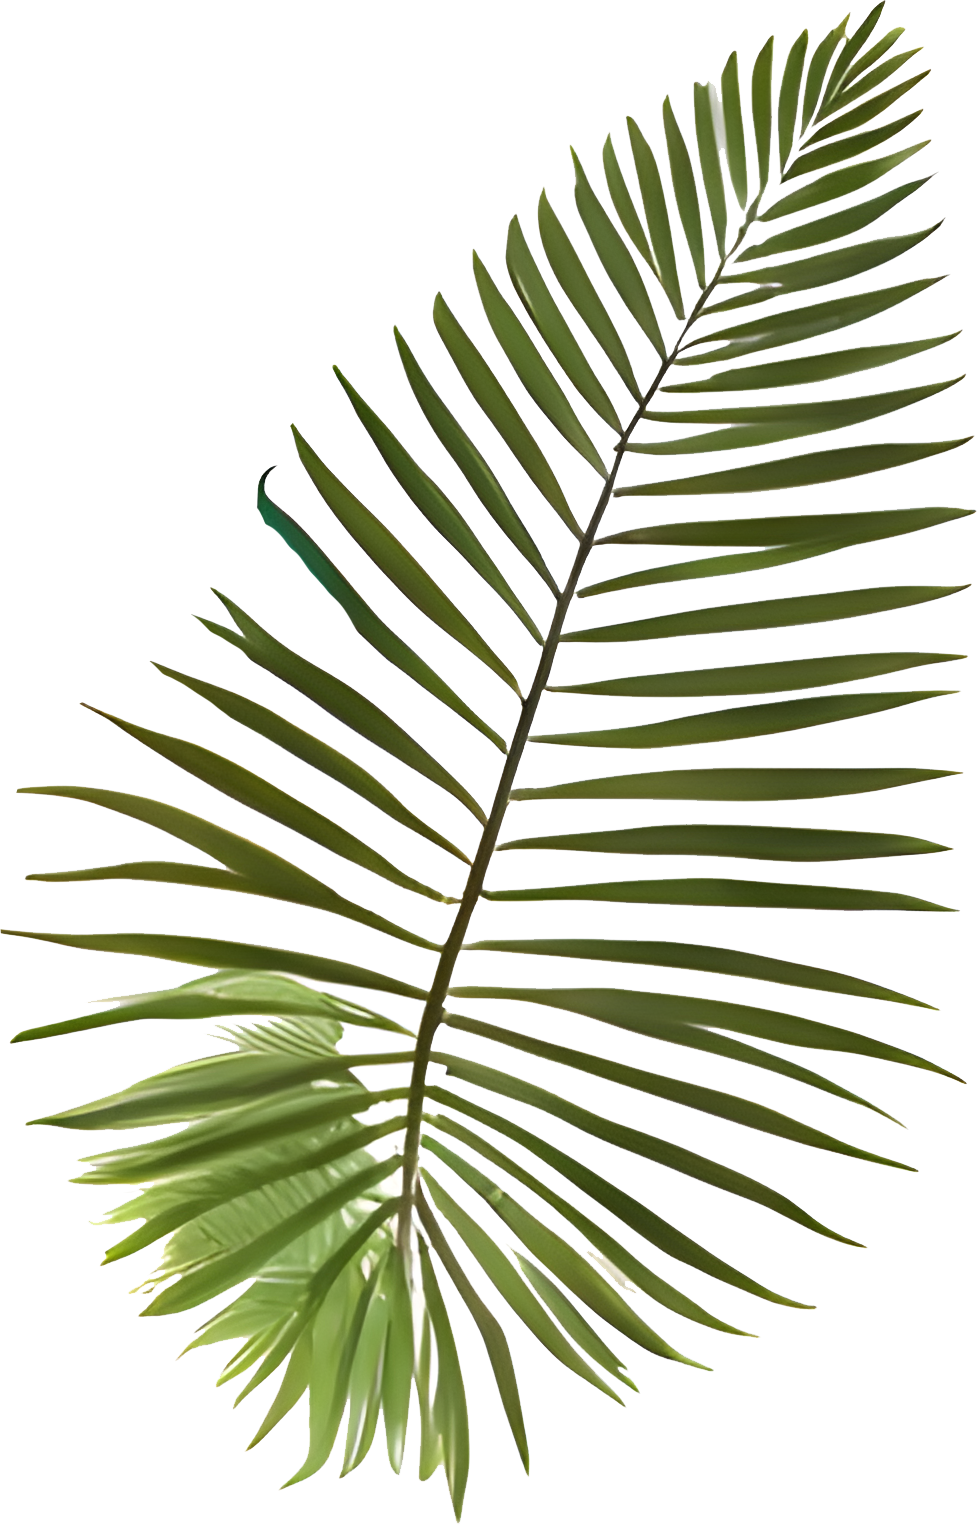 High-Res Leaf PNG Green Foliage Image, Tropical different type exotic leaves set. Jungle plants. Calathea, Monstera and different style of palm leaves_6